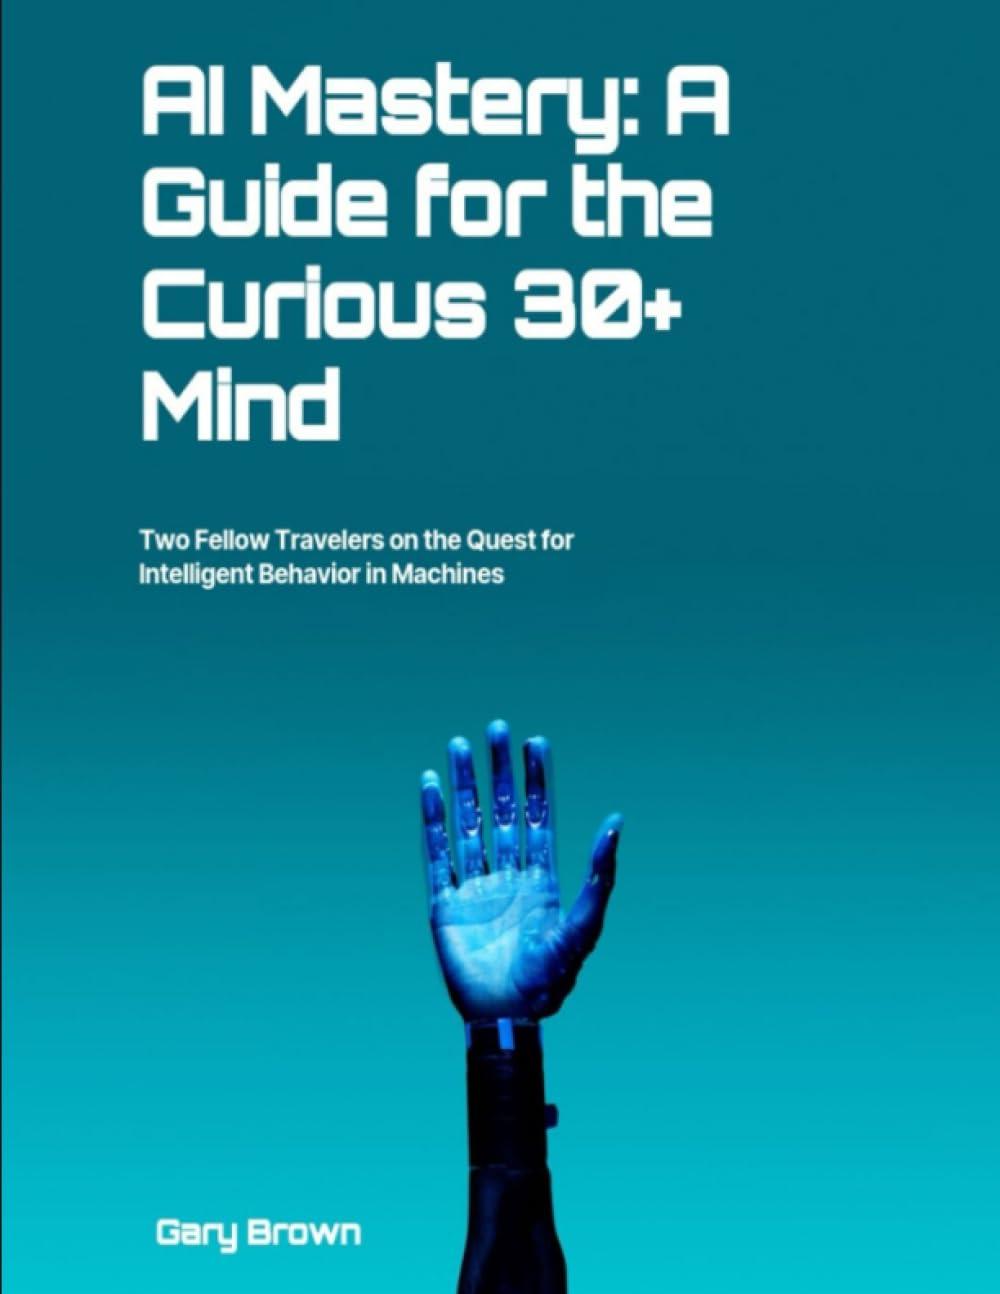 ai mastery  a guide for the curious 30+ mind 1st edition mr gary brown b0chldsn8q, 979-8861079631